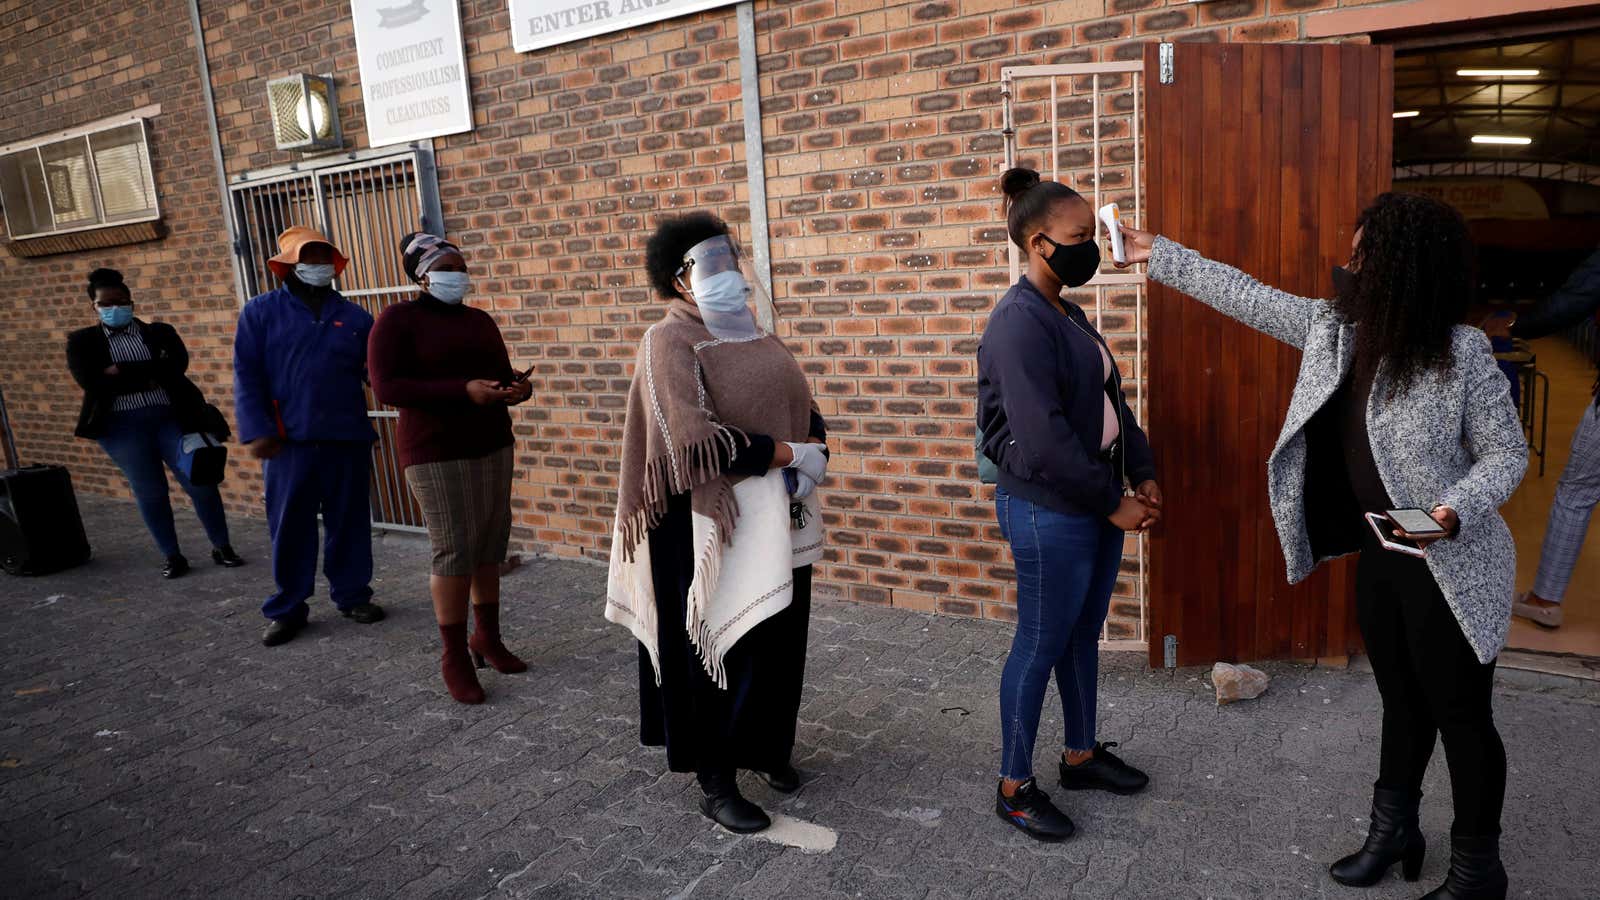 Social distancing, temperature checks, and masks in South African schools as the reopened after a strict lockdown in June